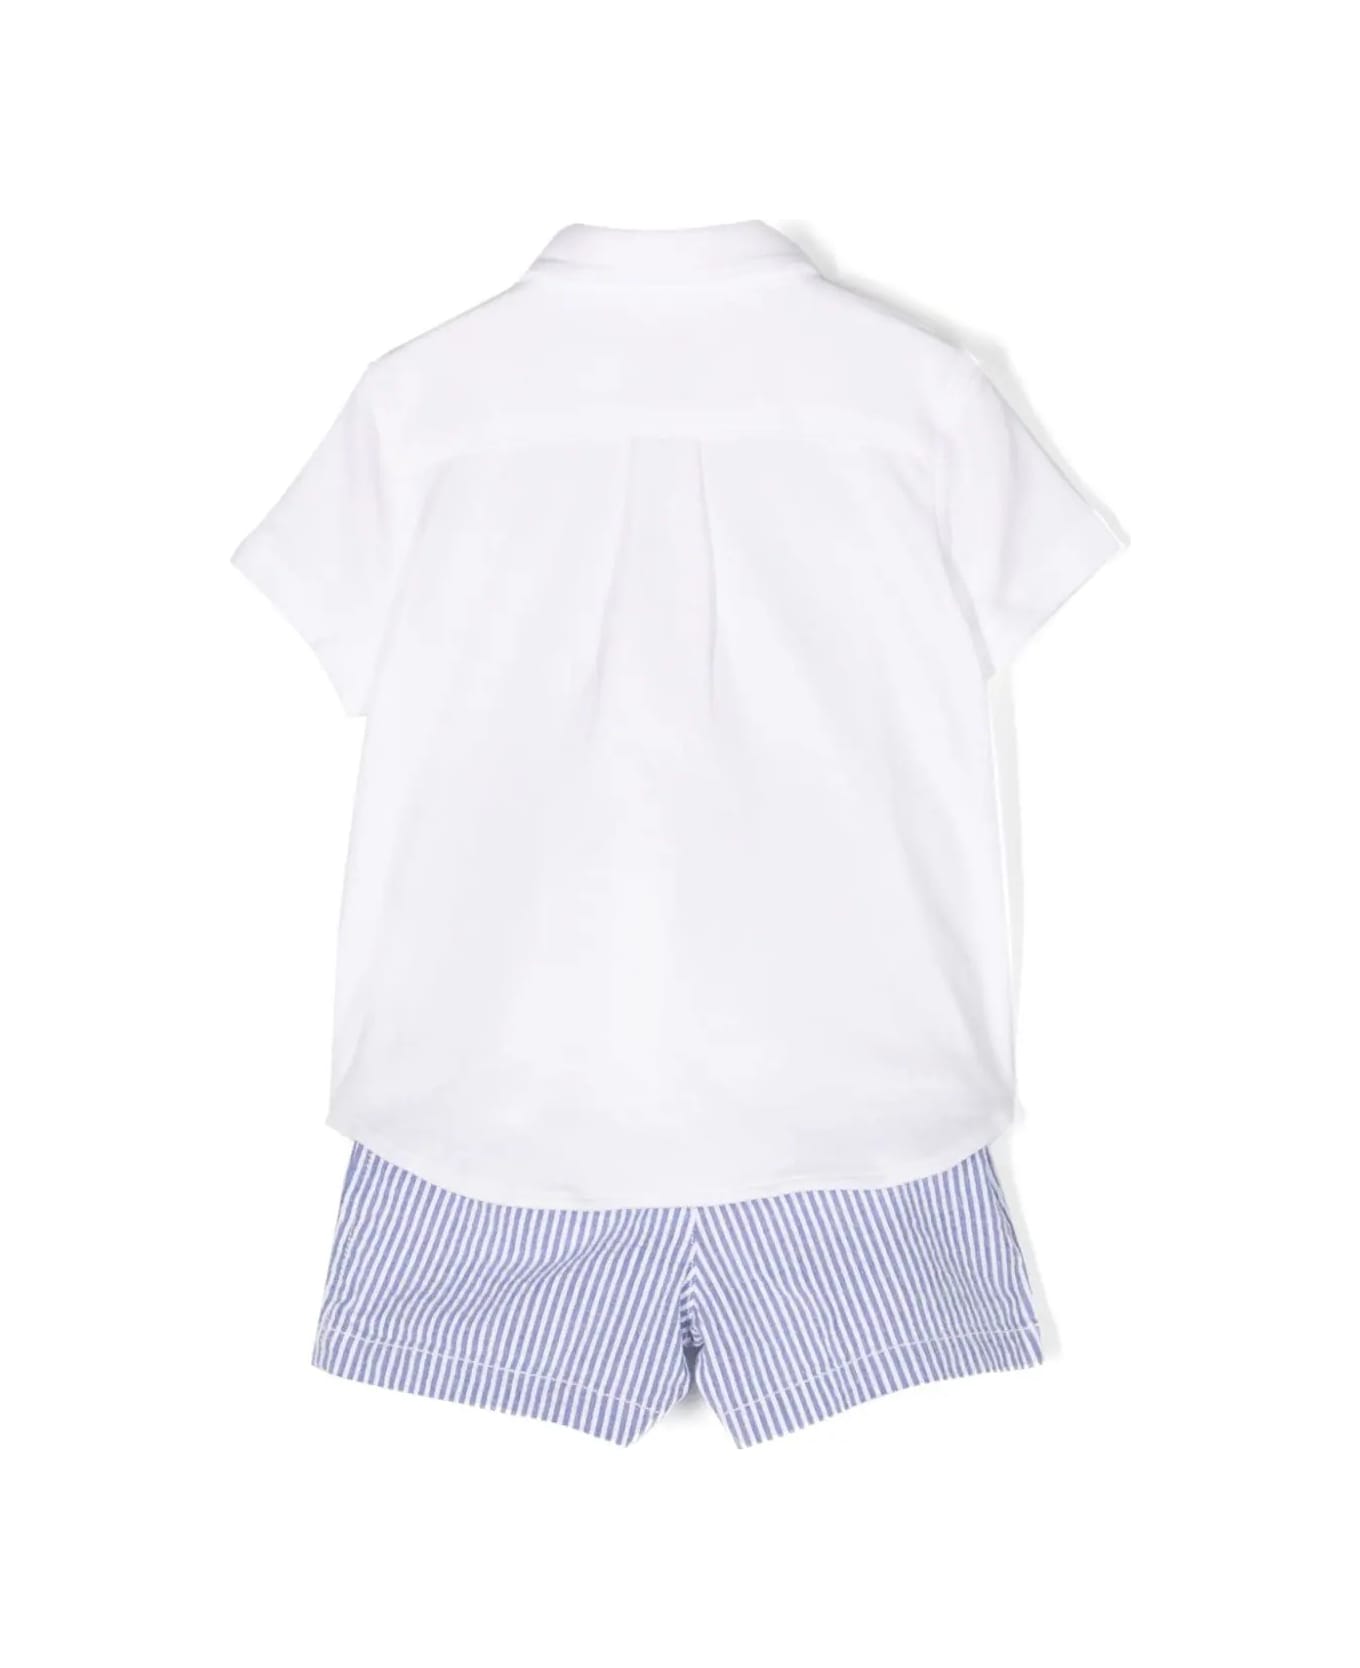 Ralph Lauren White And Light Blue Set With Shirt And Shorts - White